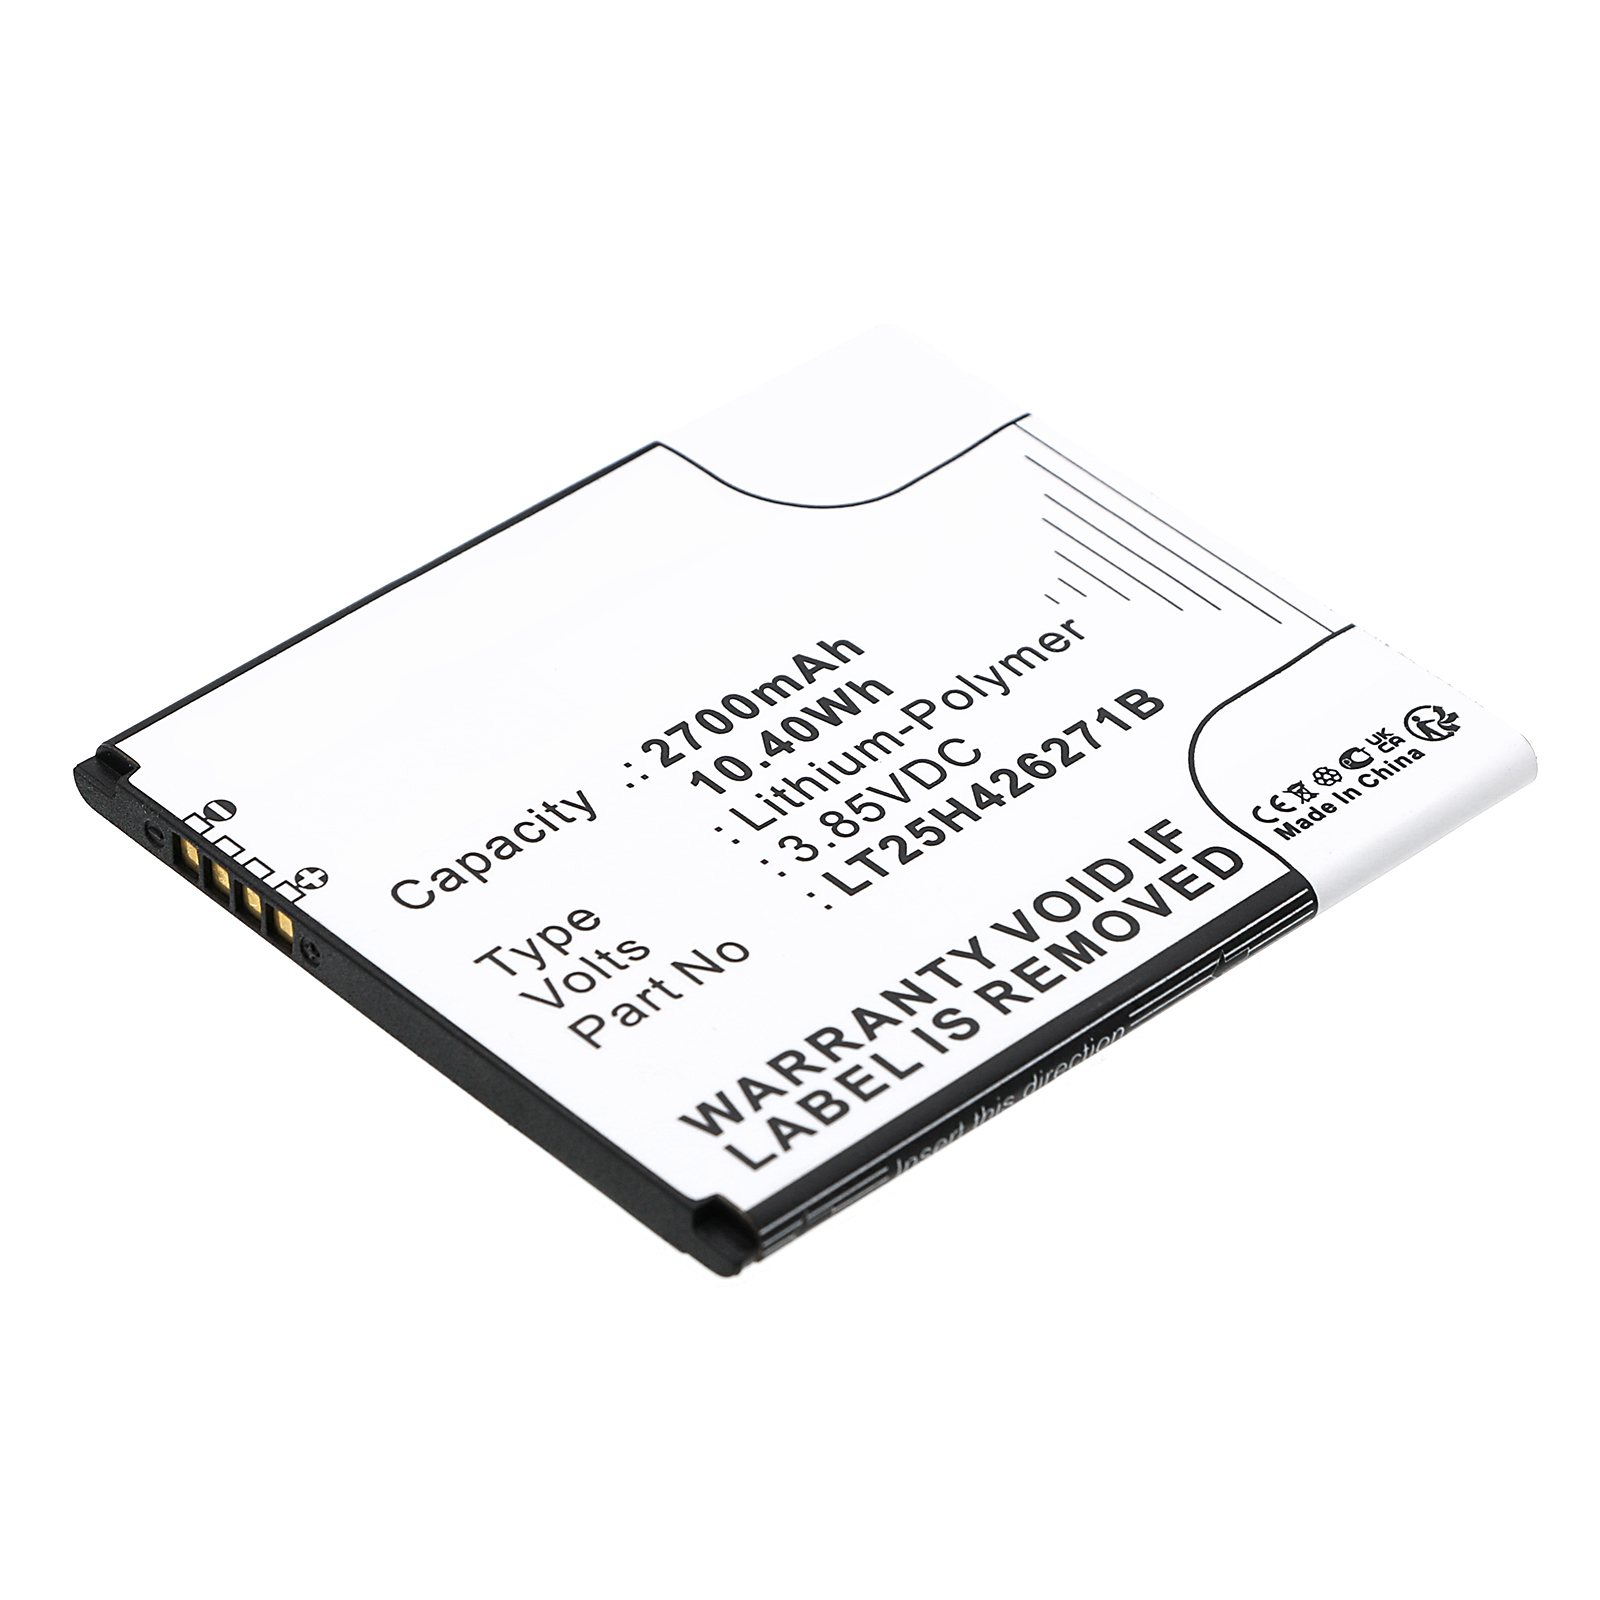 Synergy Digital Cell Phone Battery, Compatible with BLU LT25H426271B Cell Phone Battery (Li-Pol, 3.85V, 2700mAh)